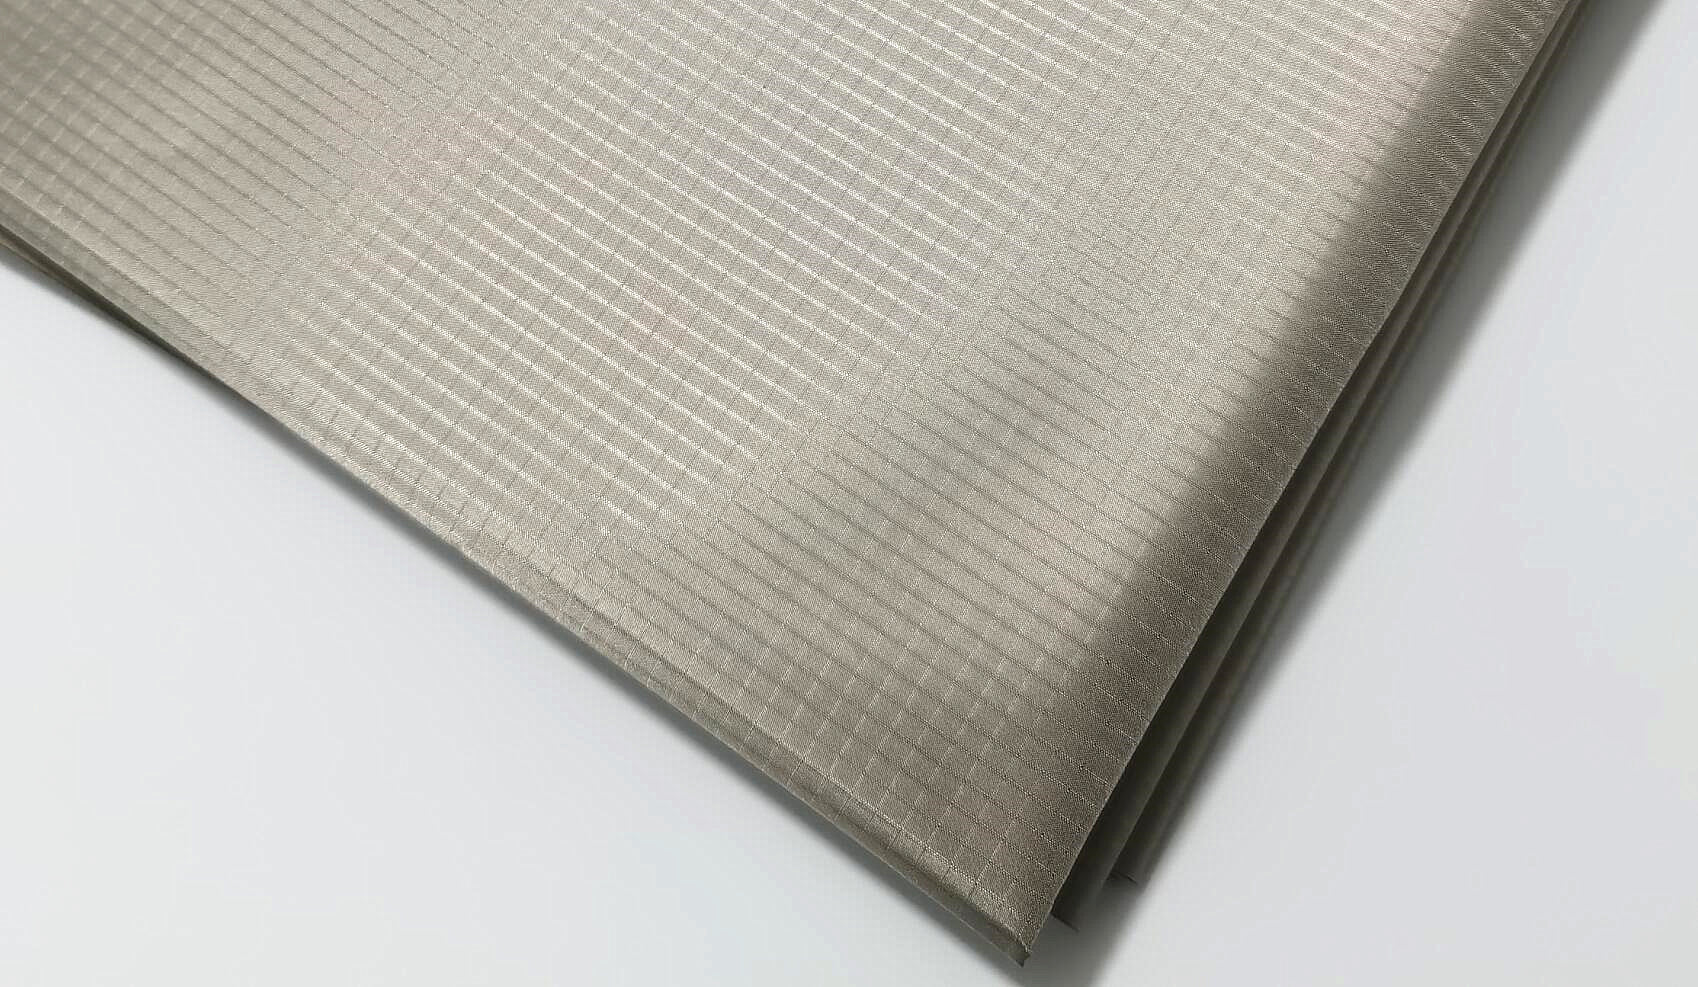 5G EMF Blocking Fabric for Electromagnetic Shielding Effectiveness Waterproof Indoor and Outdoor Usage